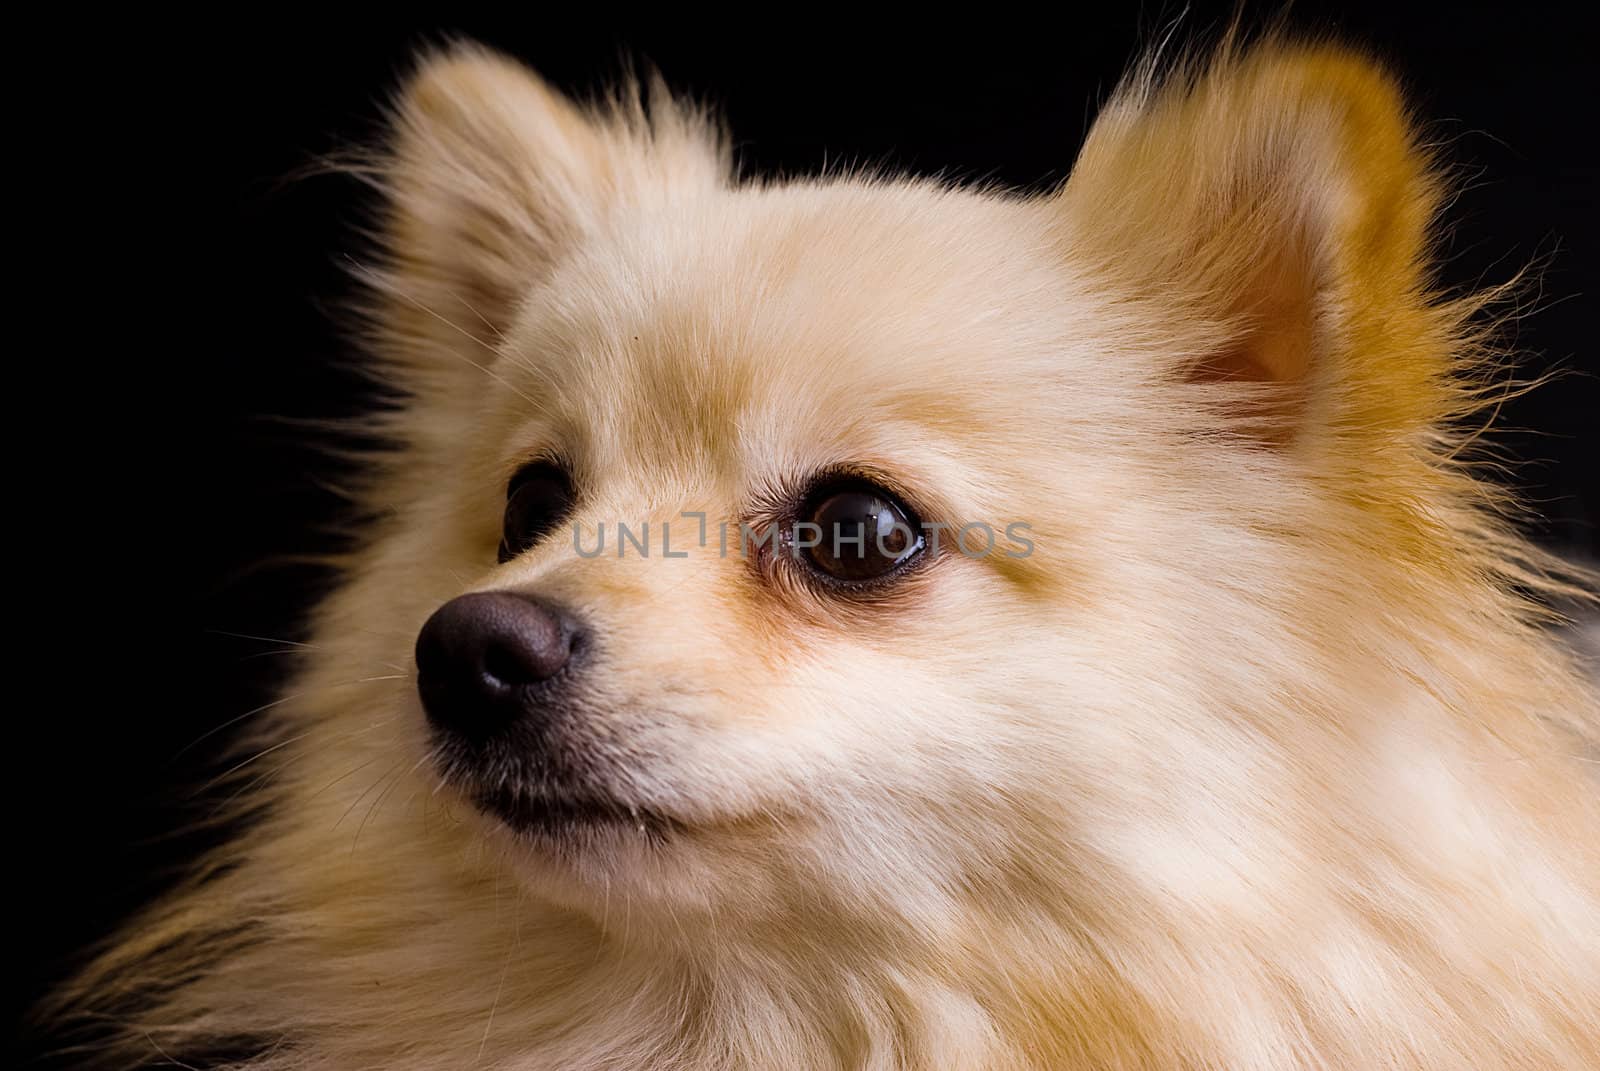 A studio shot of a small furry dog against a black background.